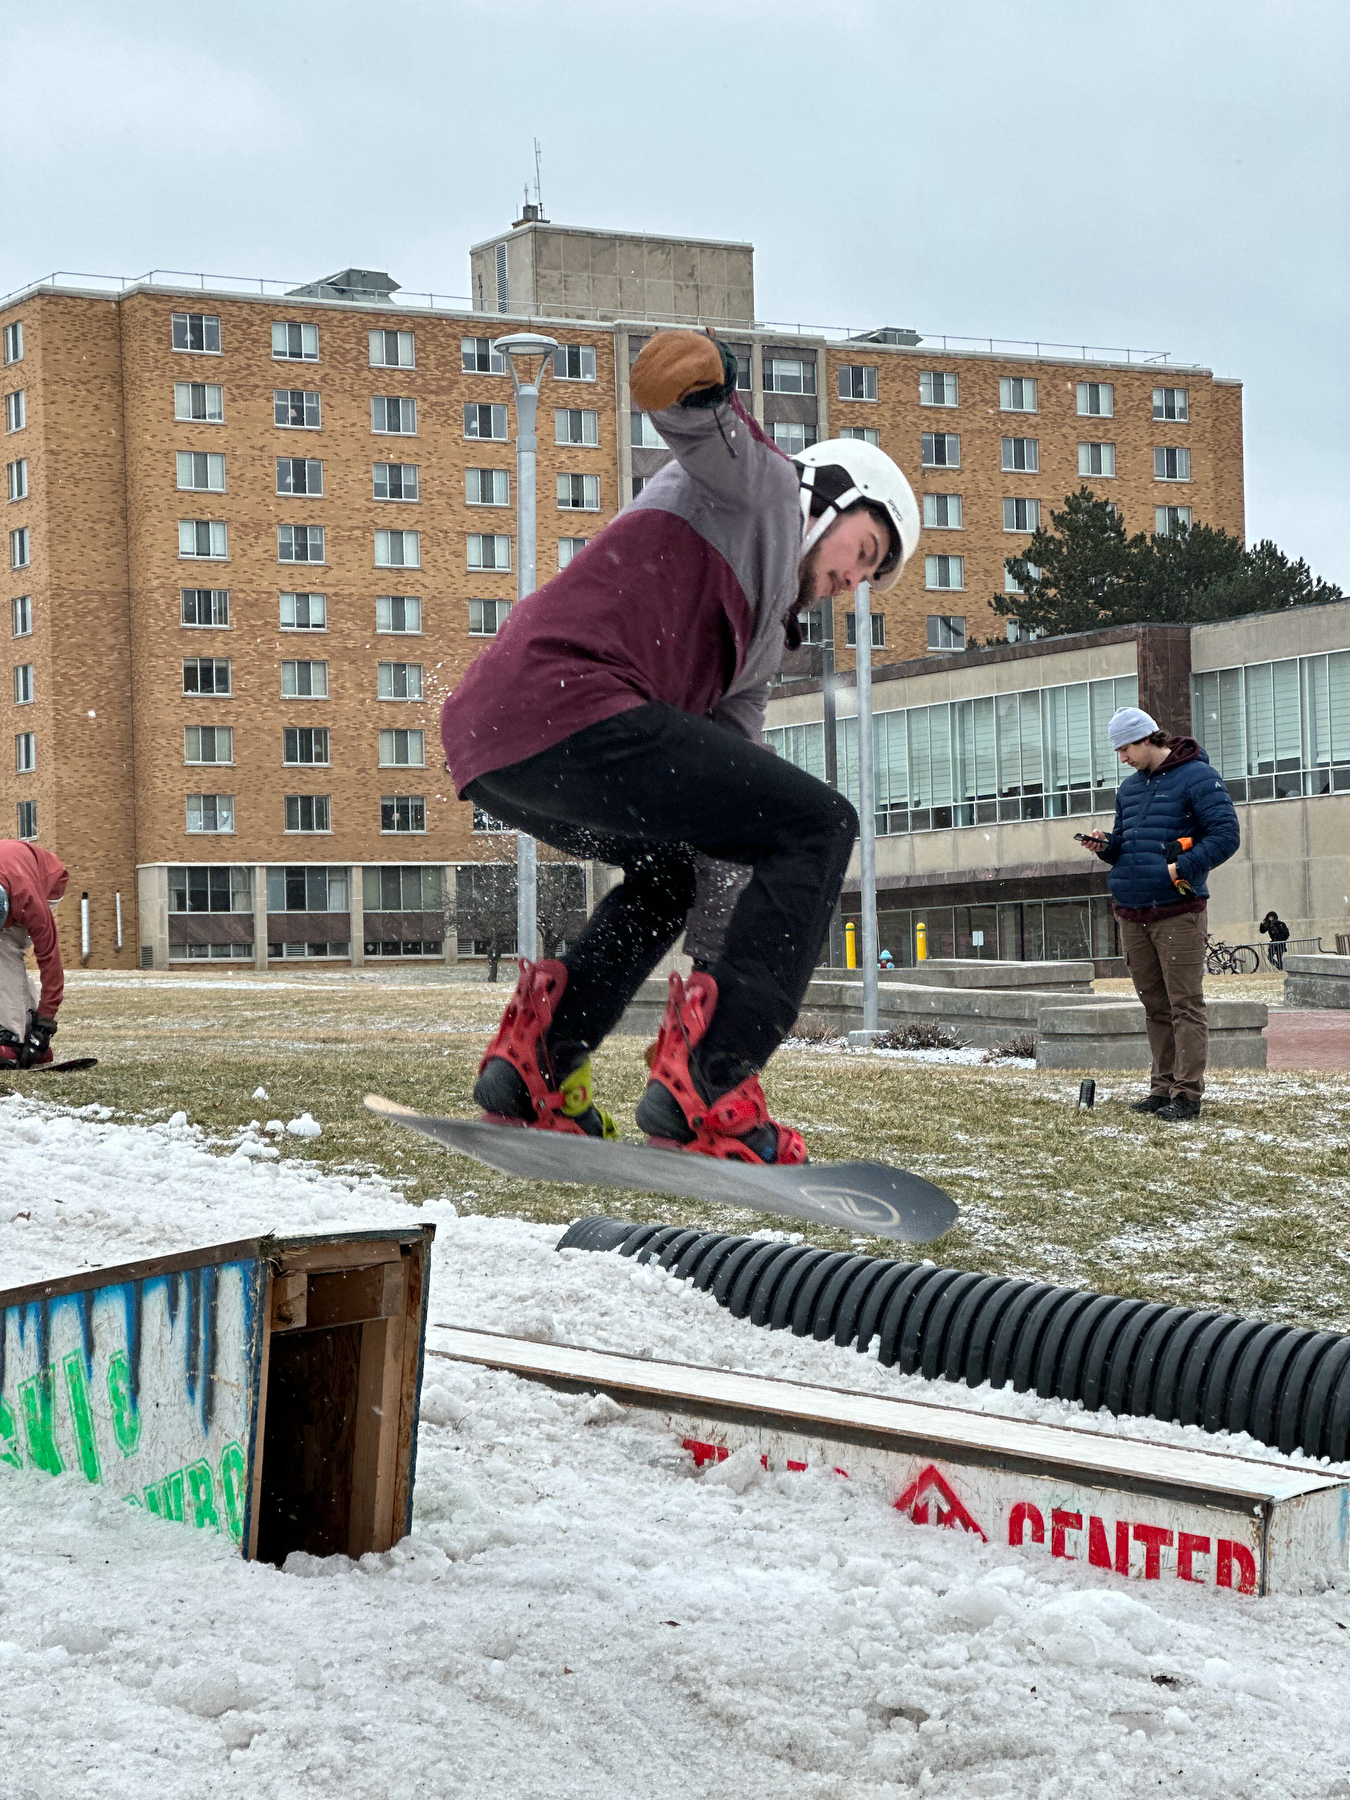 The SUNY Oswego Ski and Snowboard Club once again organized its annual Rail Jam on Feb. 17. They had to overcome an unusual February problem – a lack of snow – but the Facilities Services ground crew came through to ensure the fun could go on.